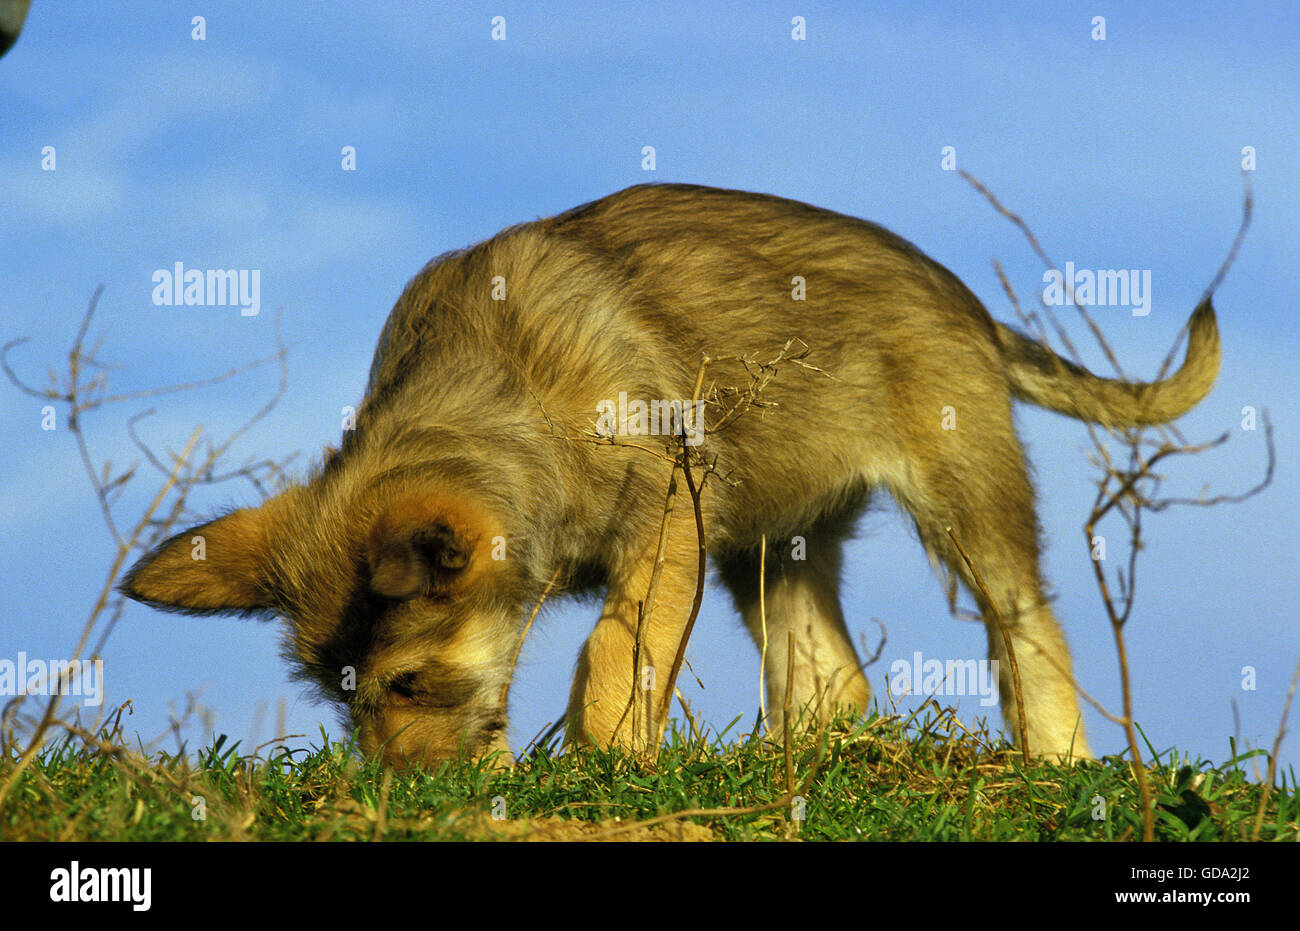 Picardy Shepherd Dog, Pup smelling Ground Stock Photo